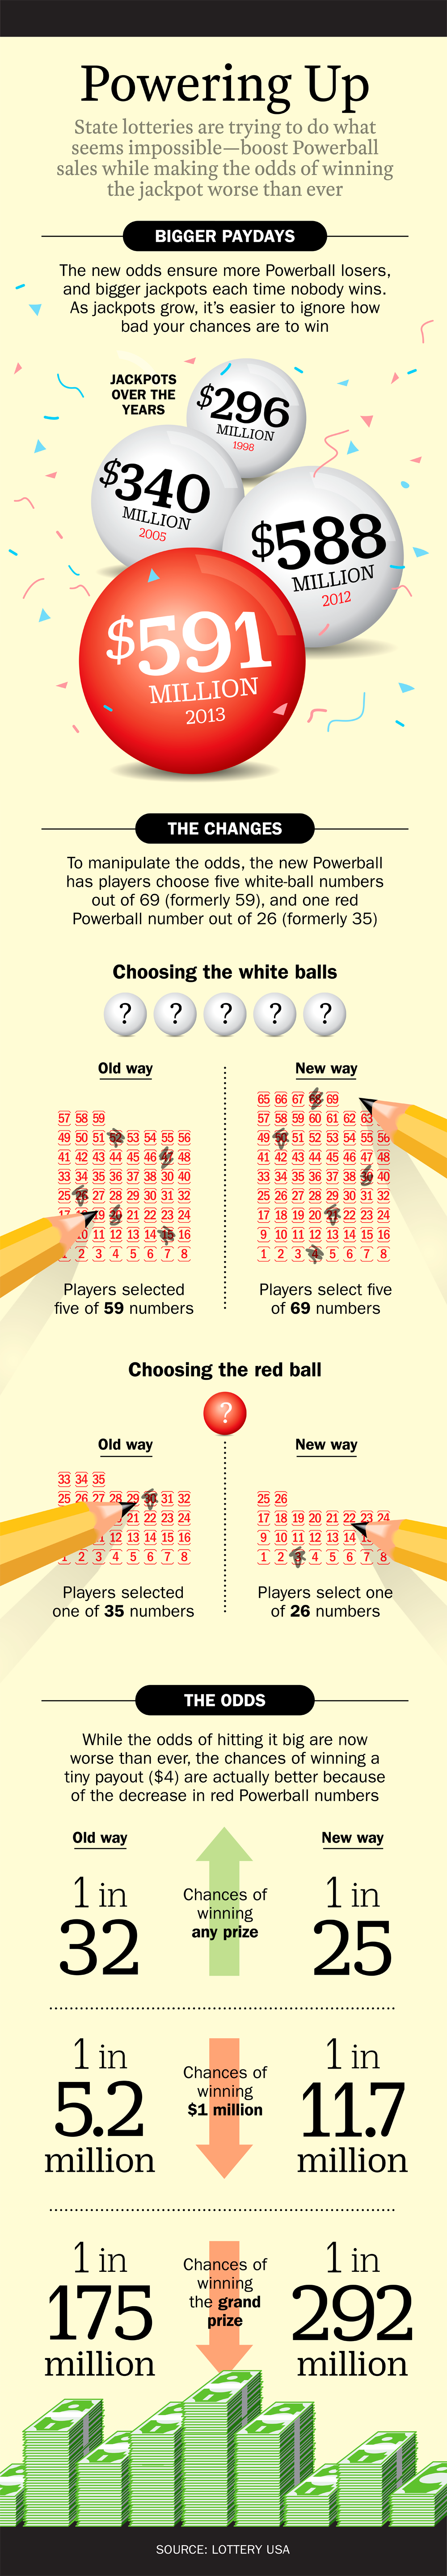 New Powerball rules